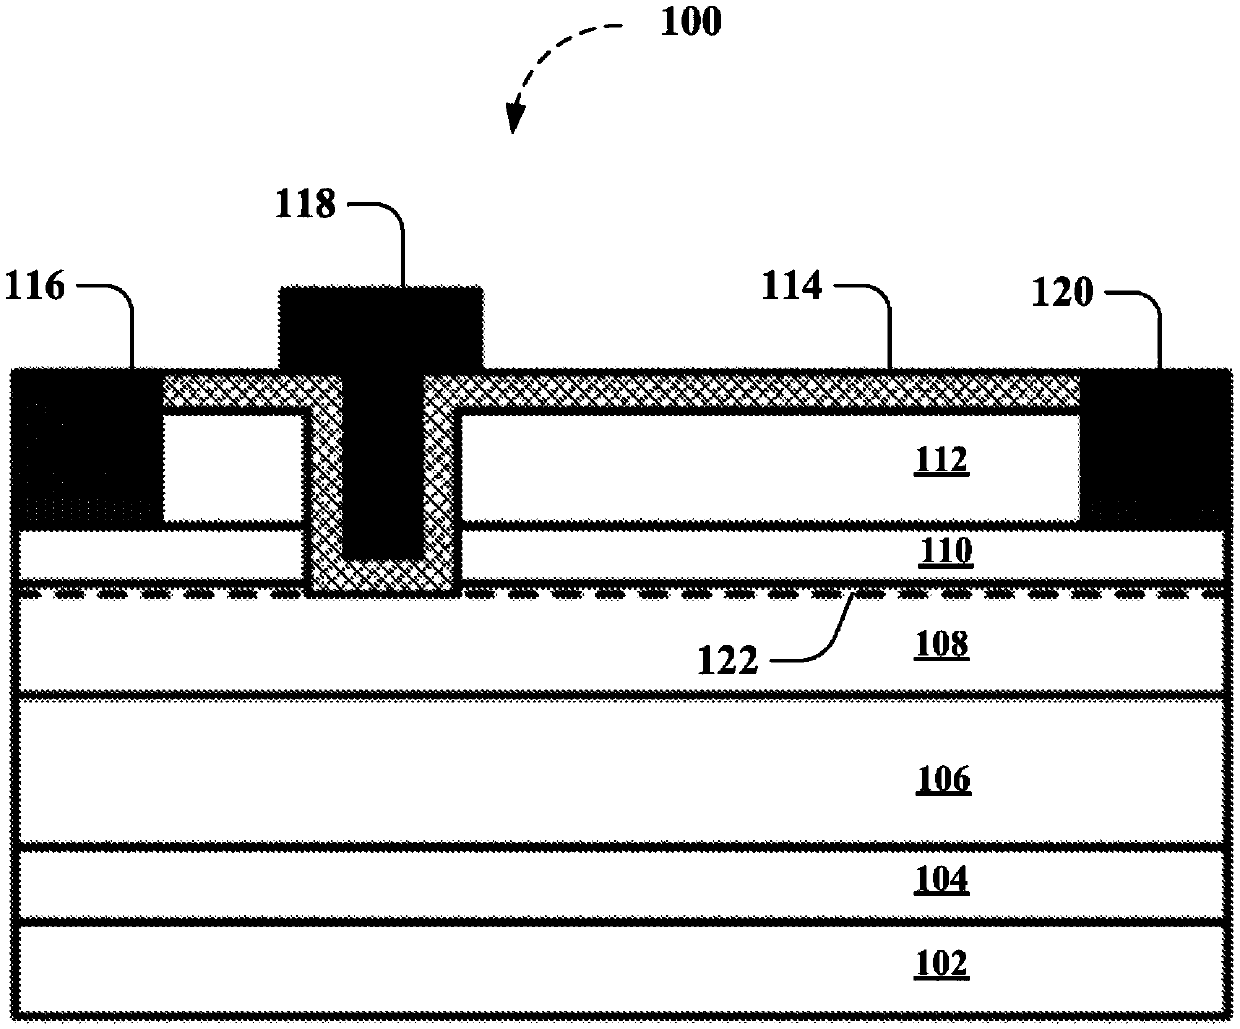 Metal-insulator-semiconductor transistors with gate-dielectric/semiconductor interfacial protection layer